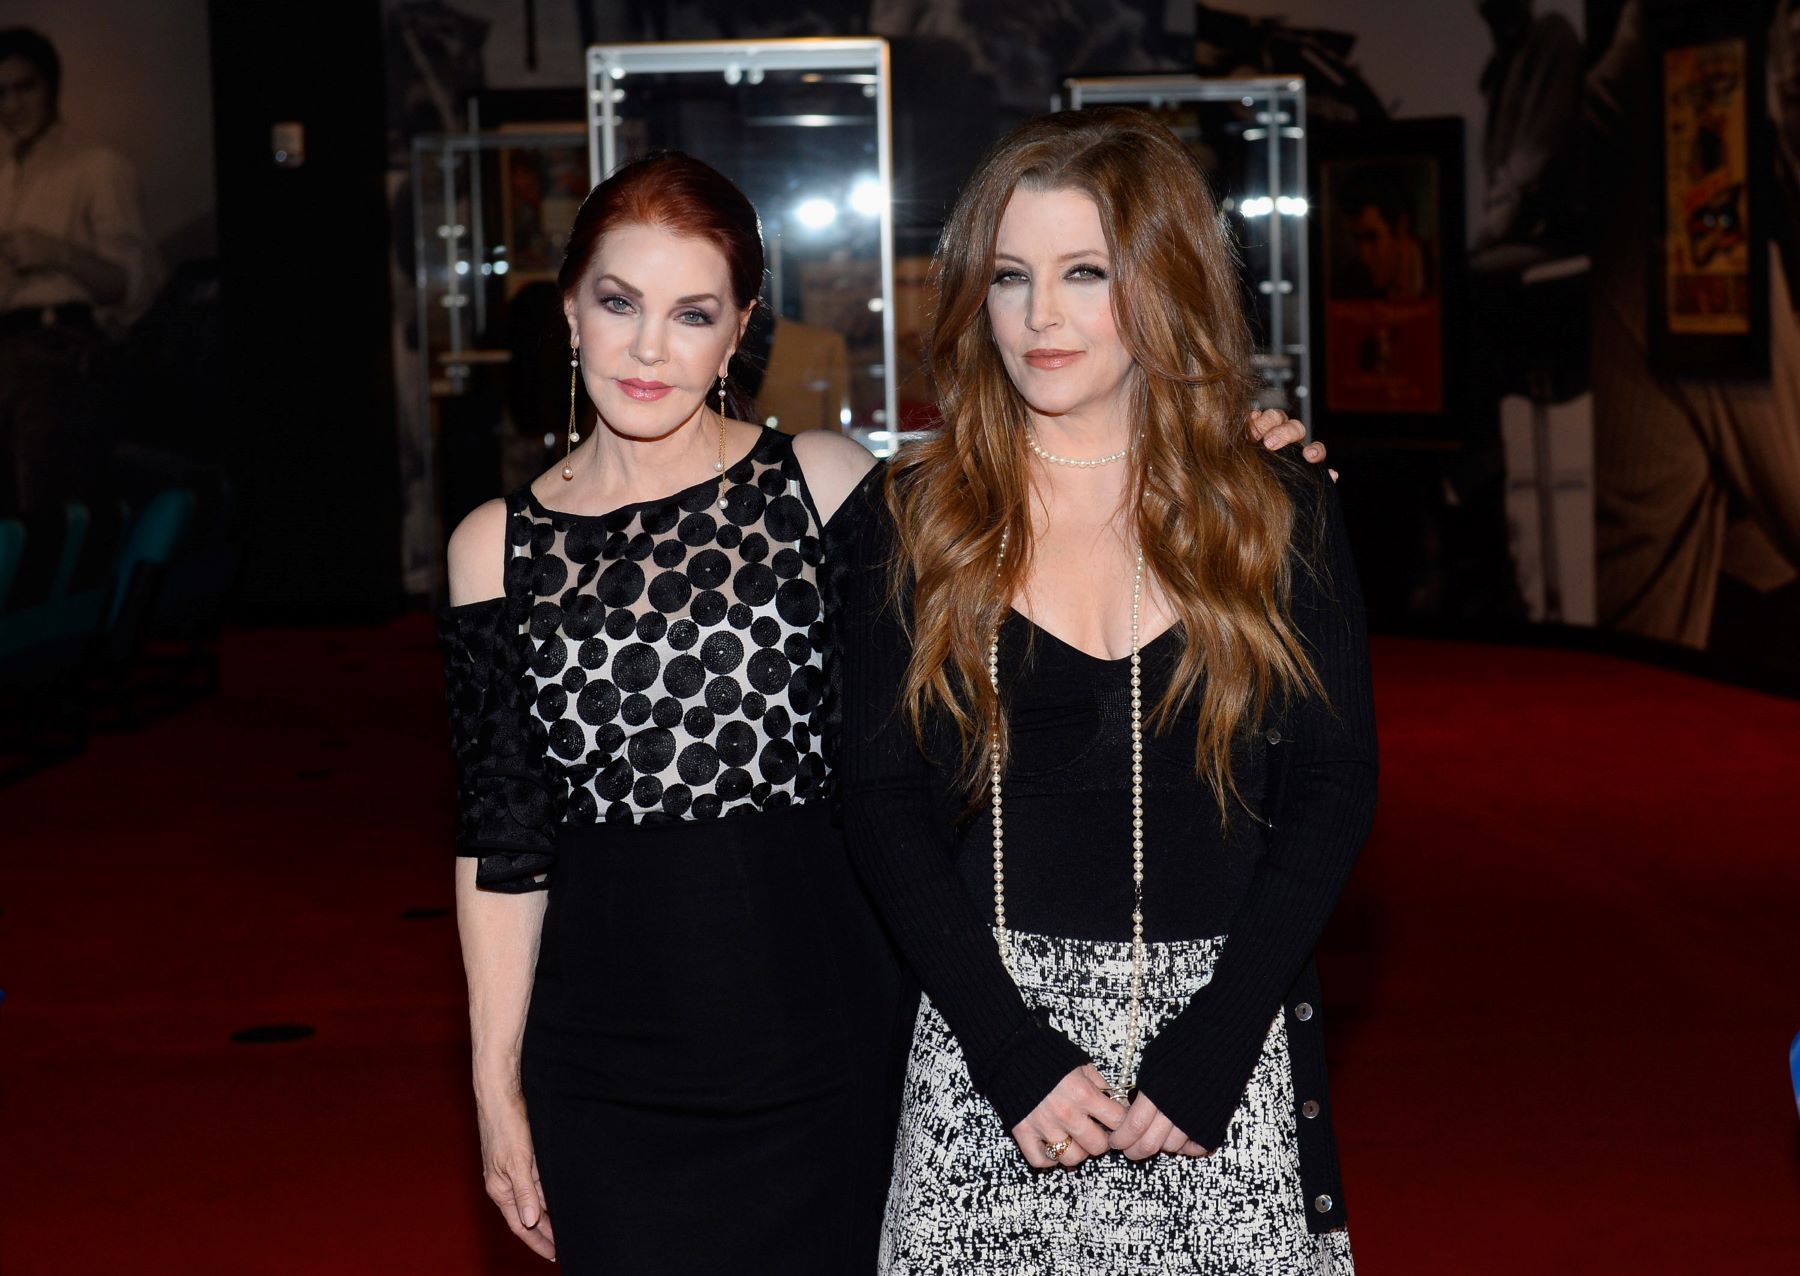 Priscilla Presley and Lisa Marie Presley at the grand opening of 'ELVIS' at the Westgate Las Vegas Resort & Casino